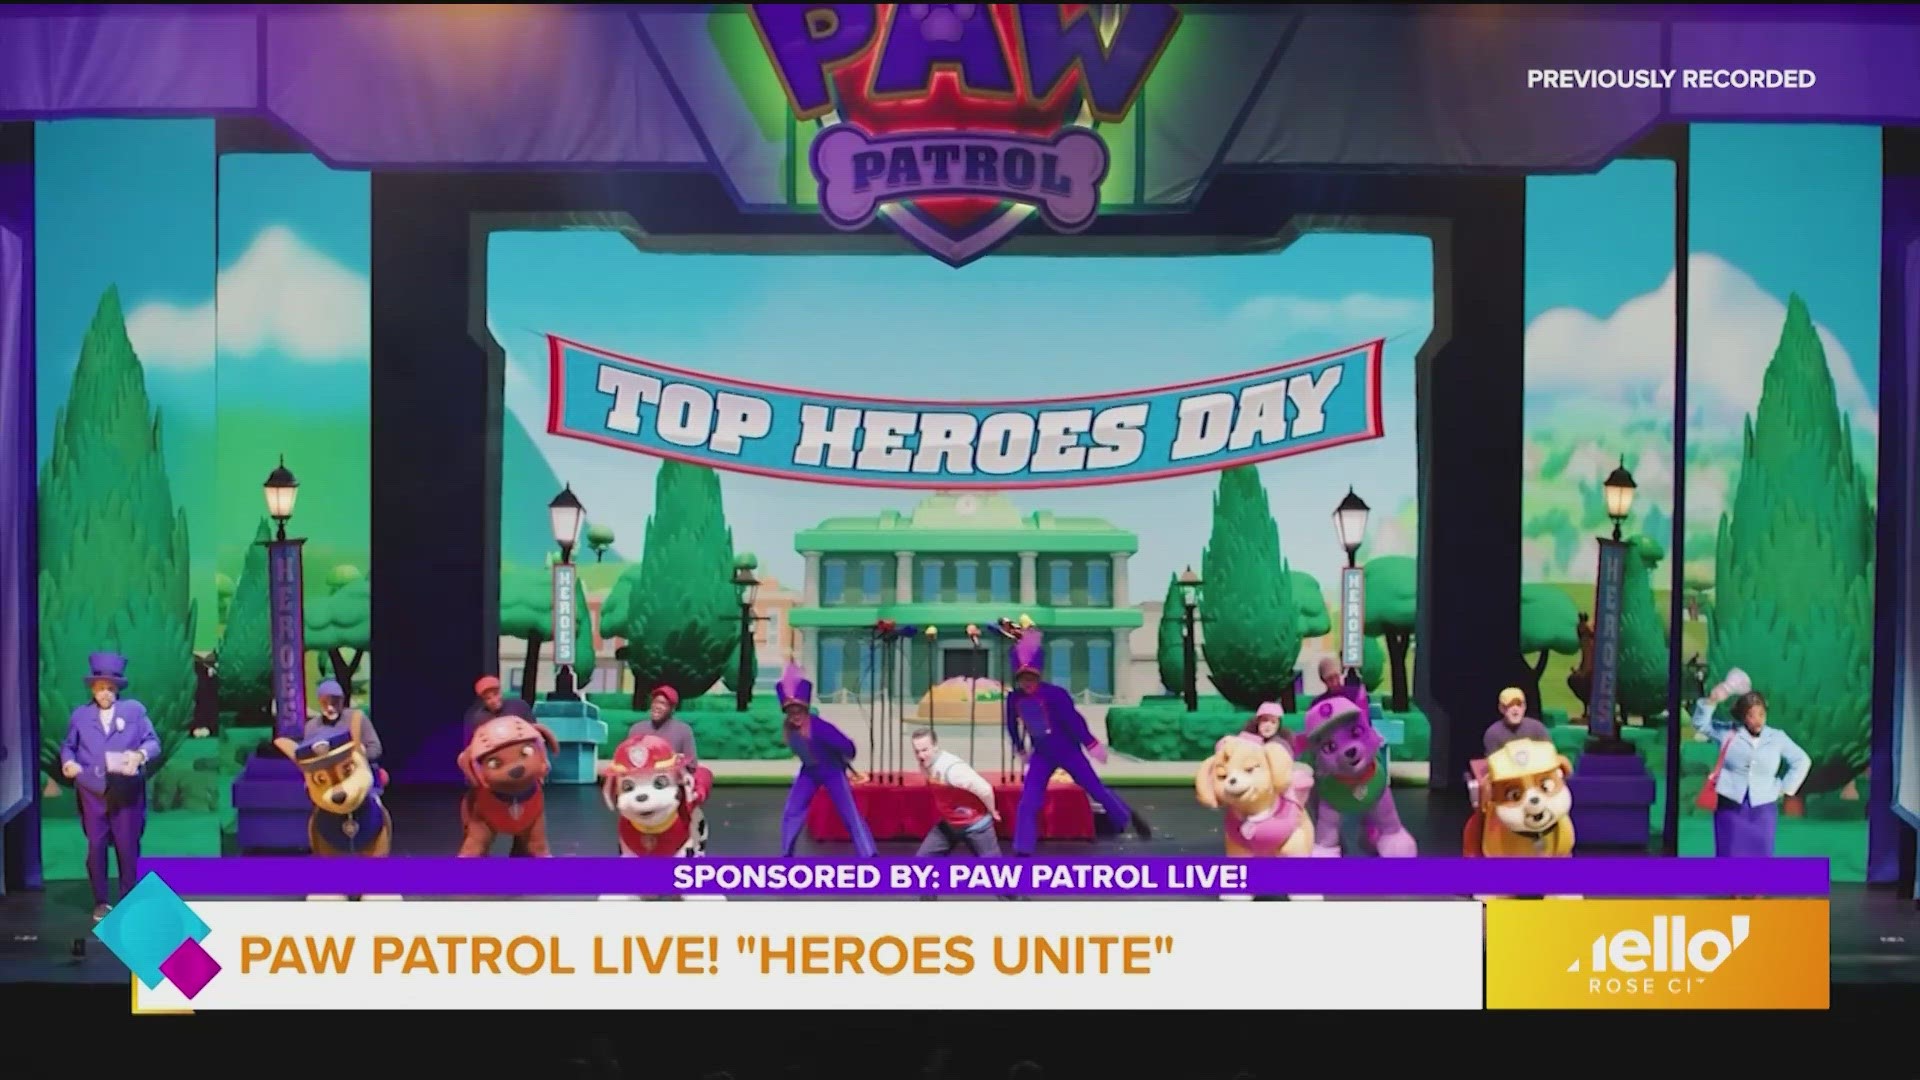 This segment is sponsored by Paw Patrol LIVE!